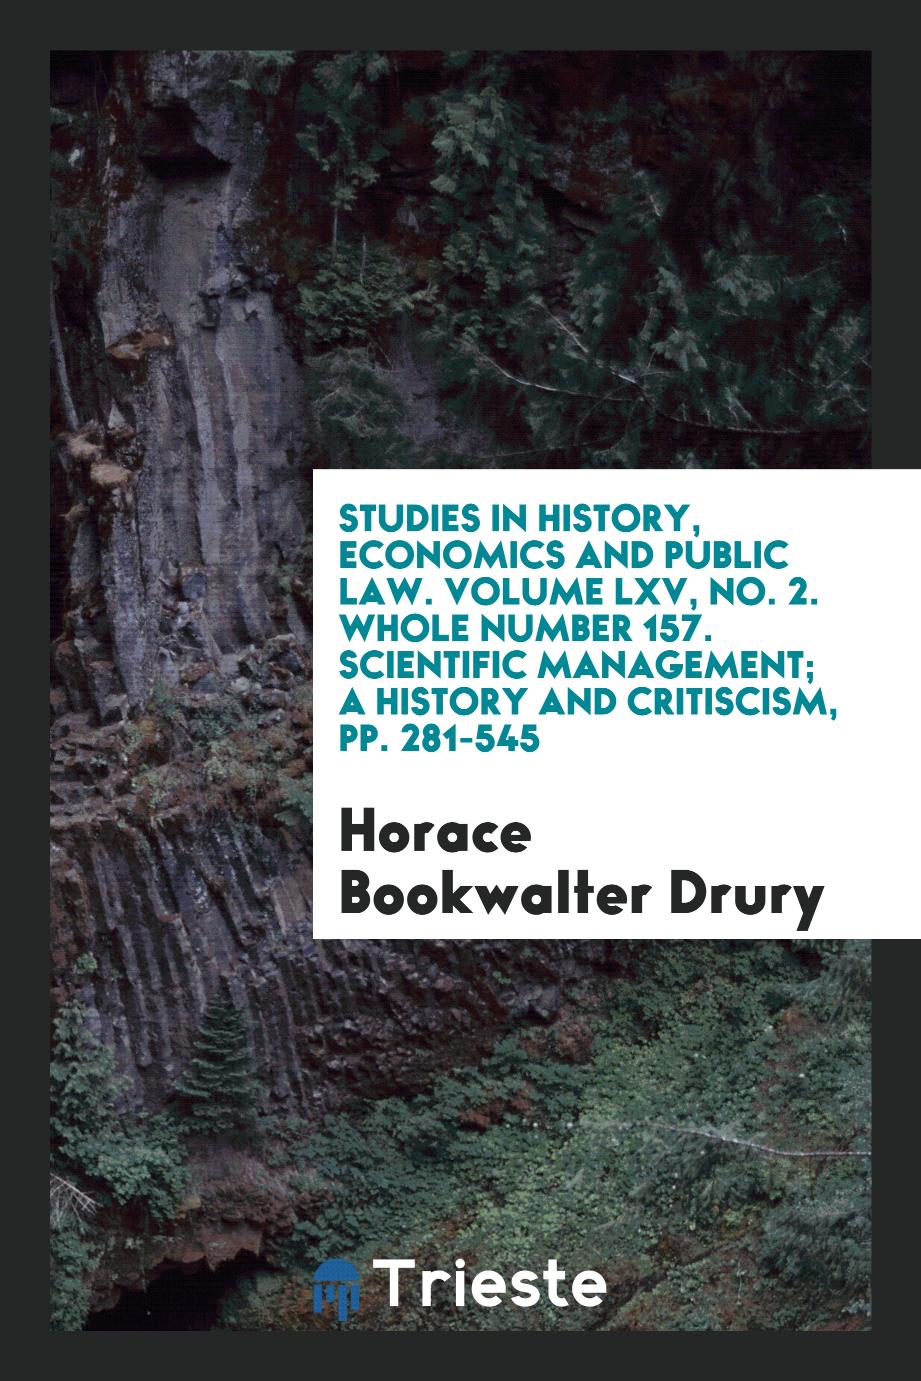 Studies in history, economics and public law. Volume LXV, No. 2. Whole number 157. Scientific management; a history and critiscism, pp. 281-545